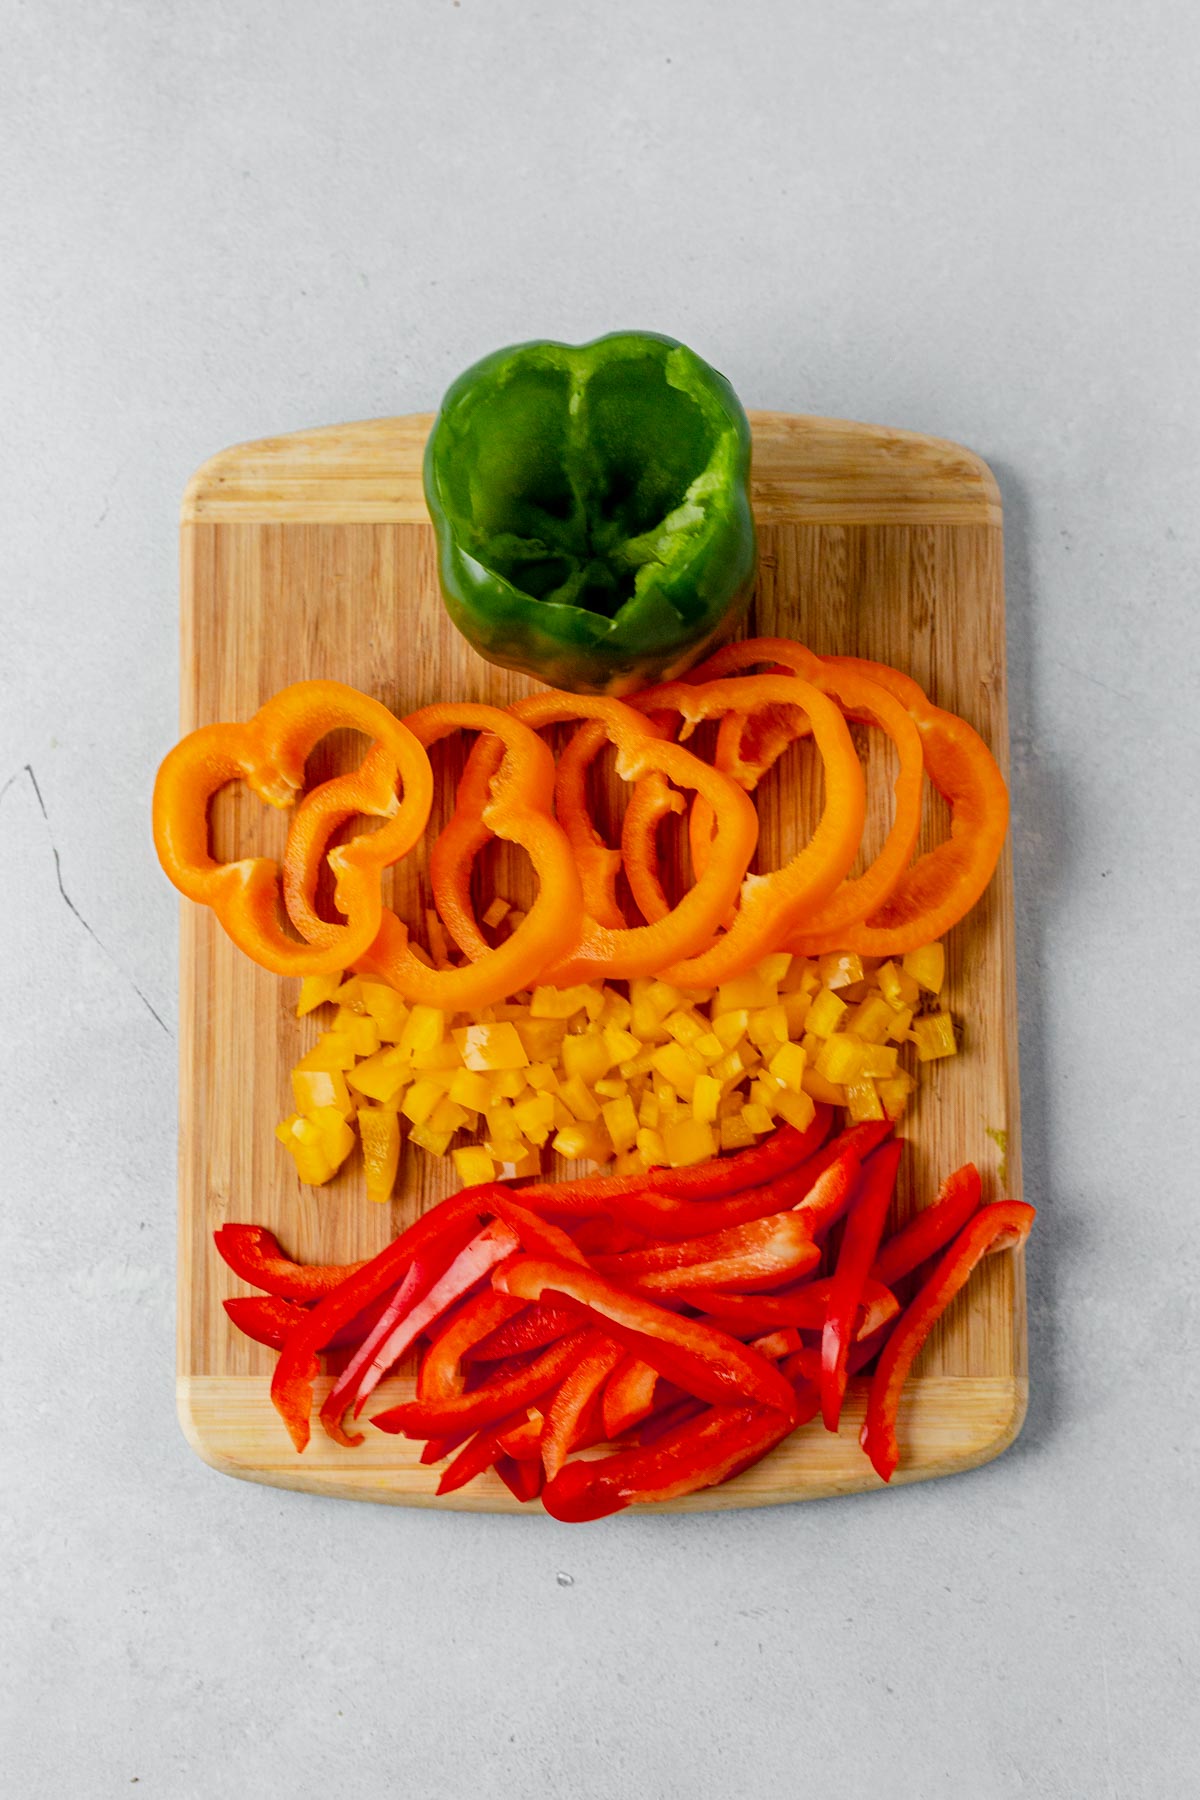 bell peppers cut four ways: sliced, diced, rings and stuffed